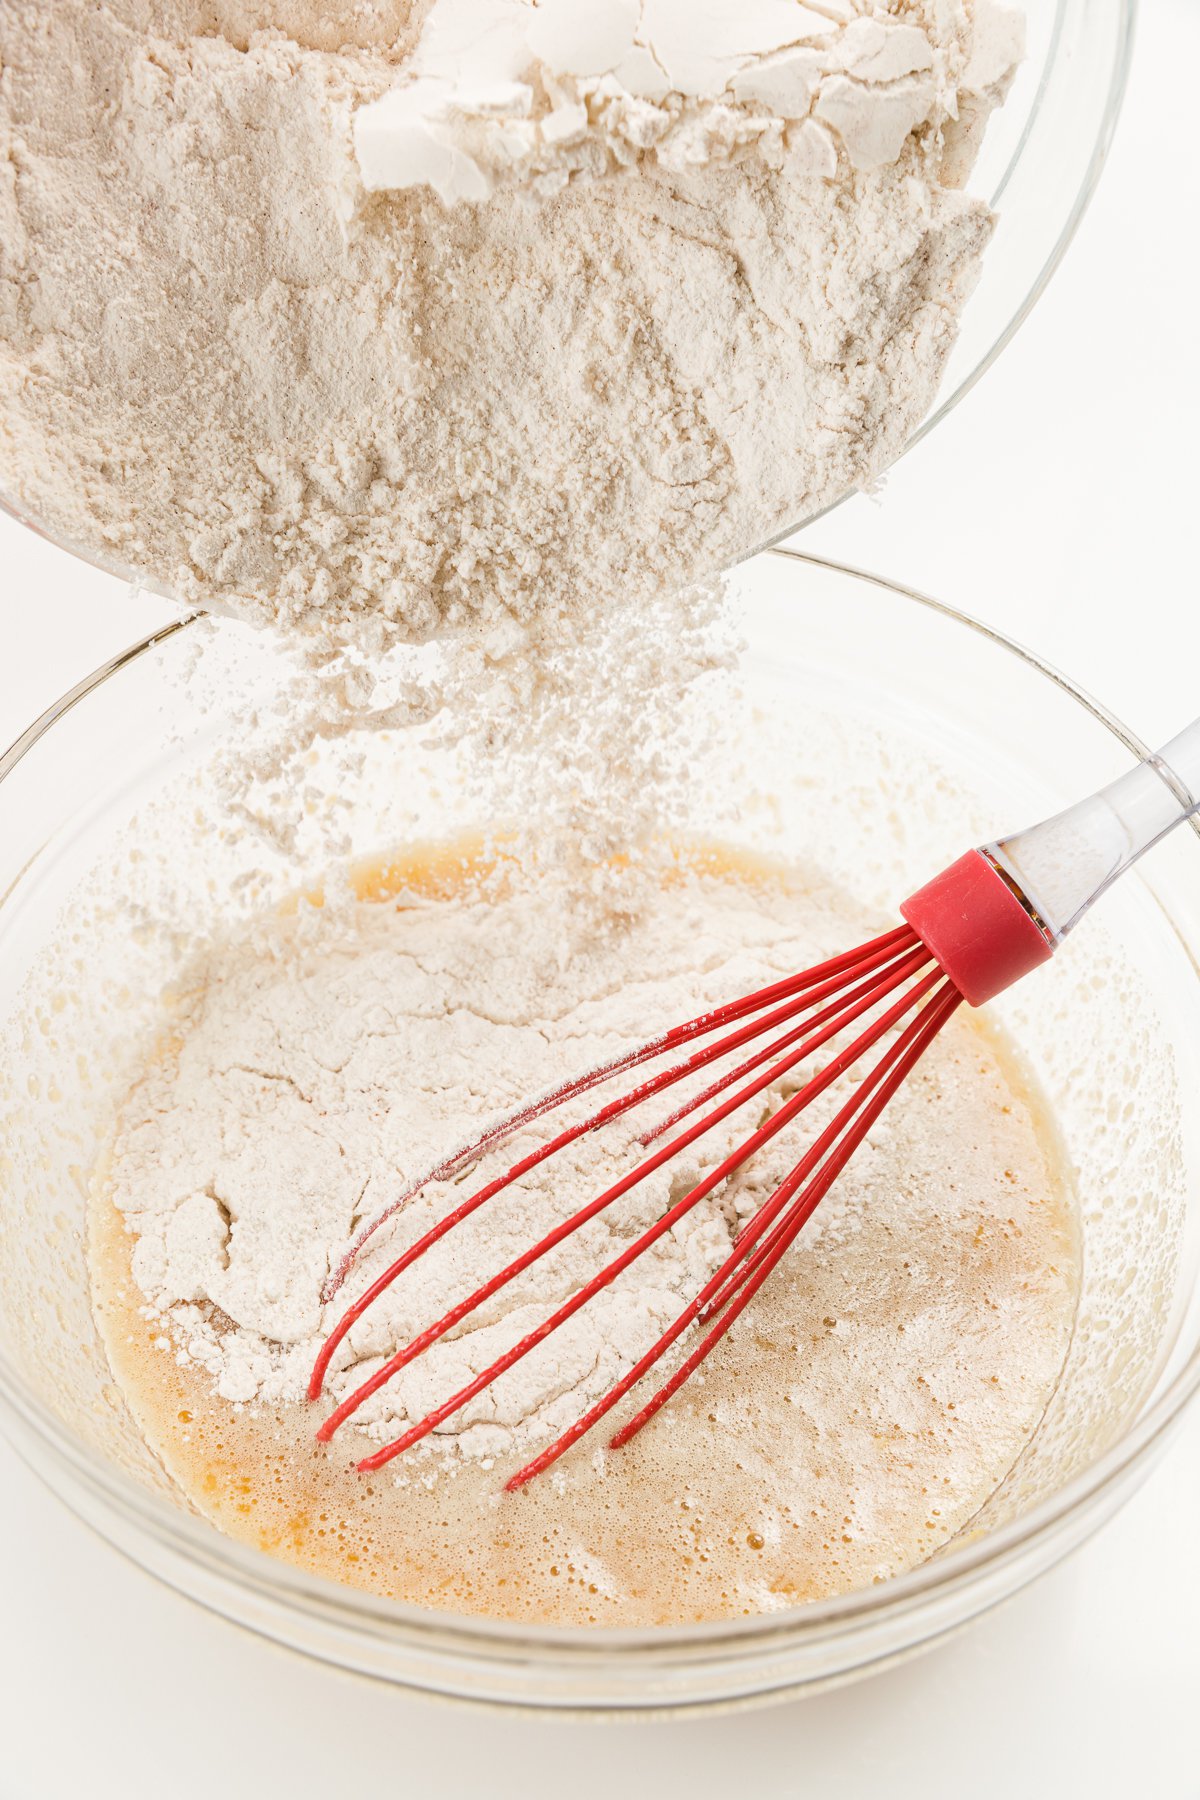 Flour pouring into a bowl of wet ingredients with a red whisks